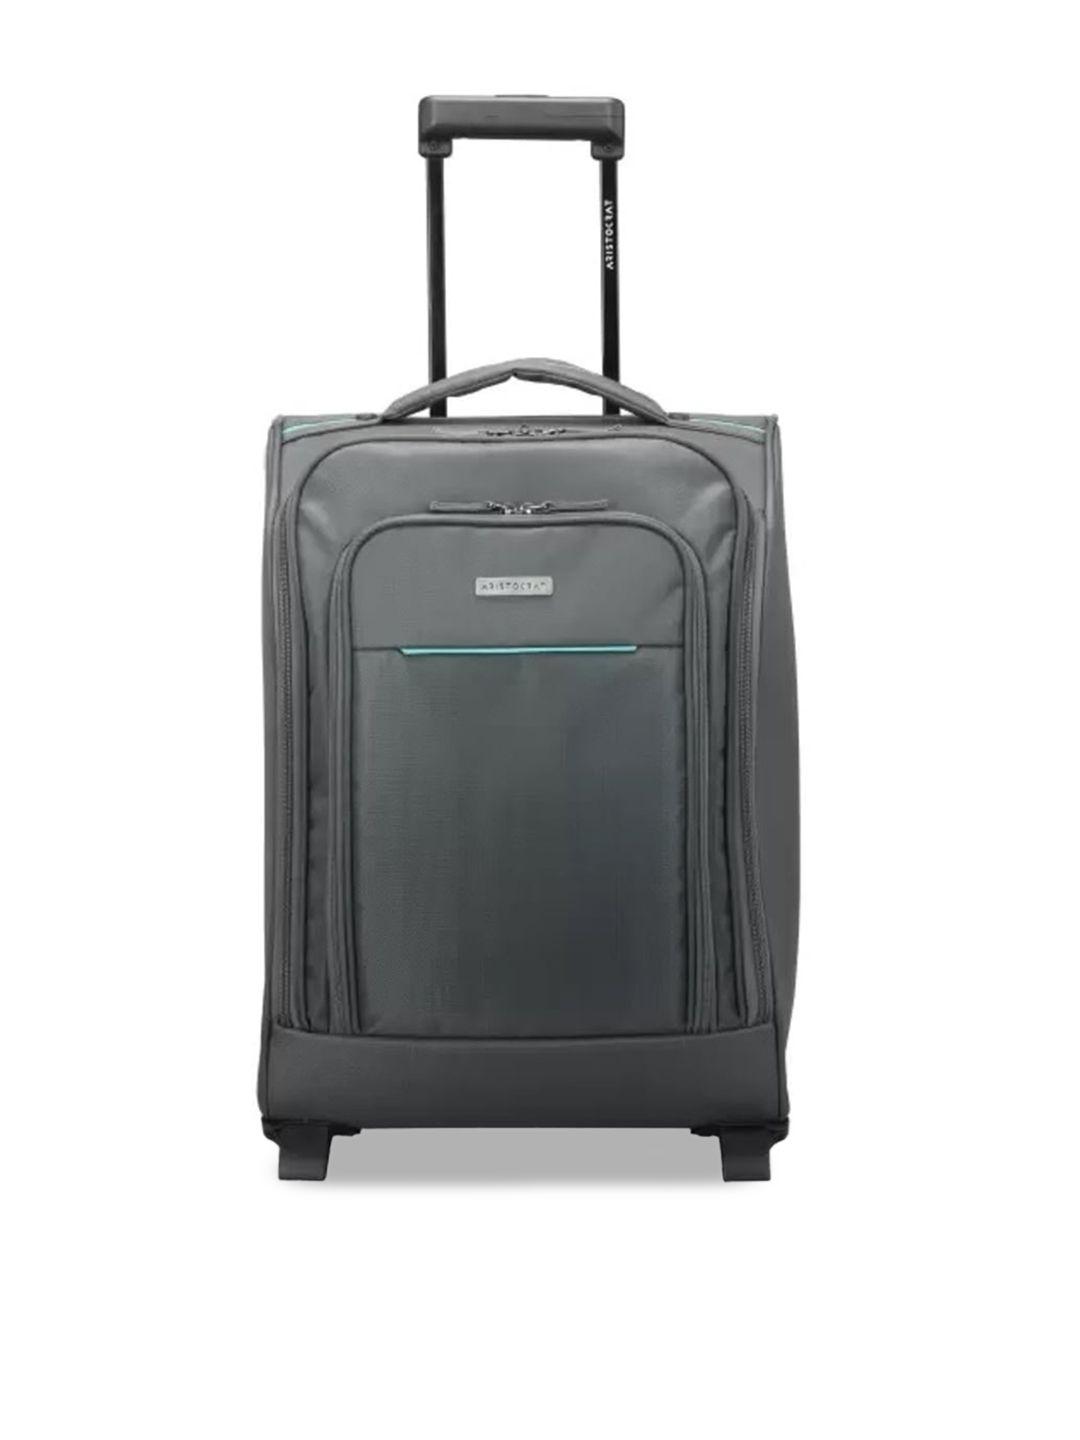 aristocrat-soft-sided-trolley-suitcases